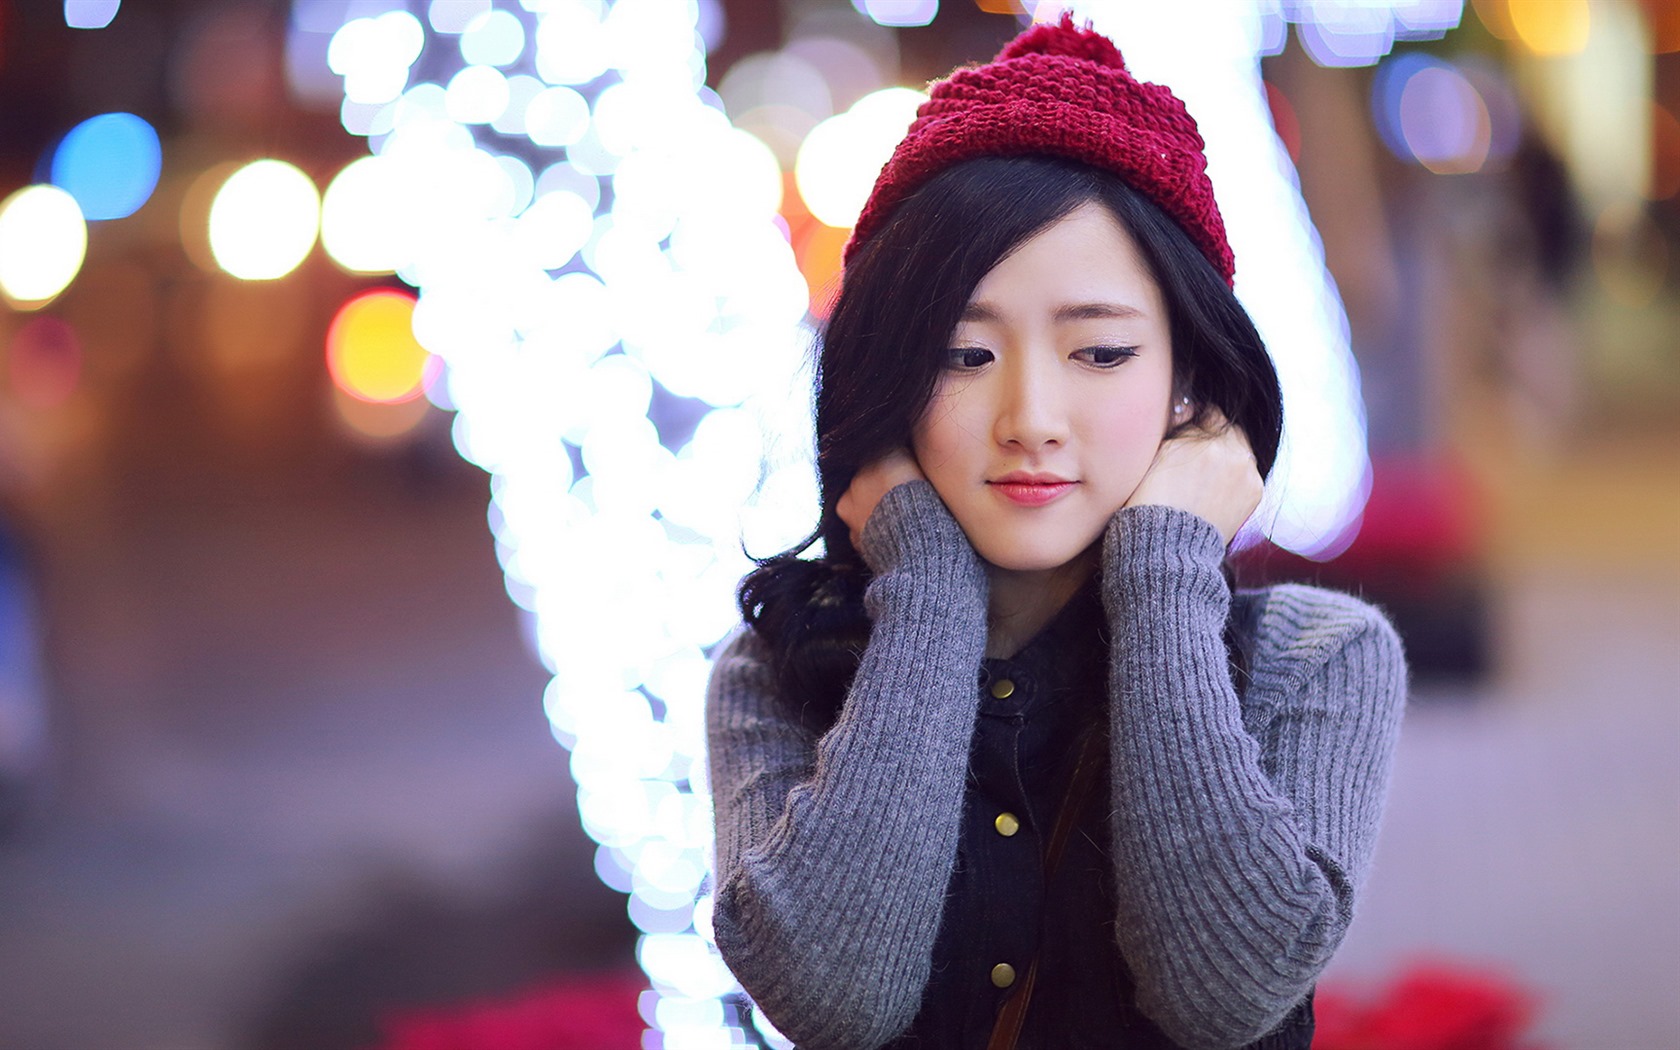 Pure and lovely young Asian girl HD wallpapers collection (1) #27 - 1680x1050